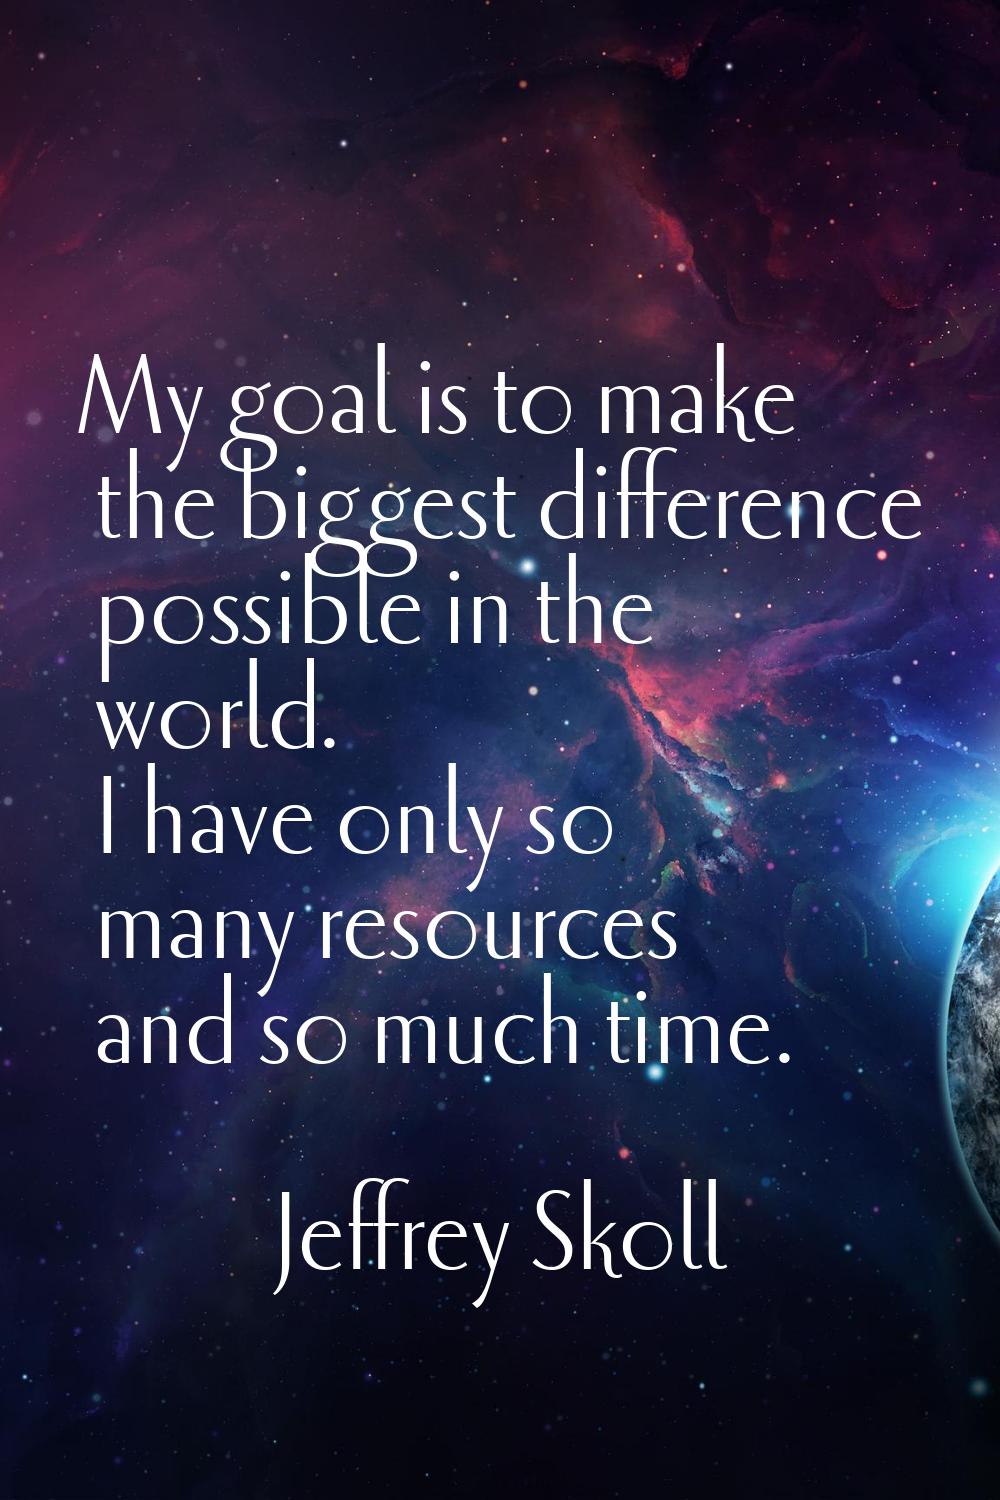 My goal is to make the biggest difference possible in the world. I have only so many resources and 